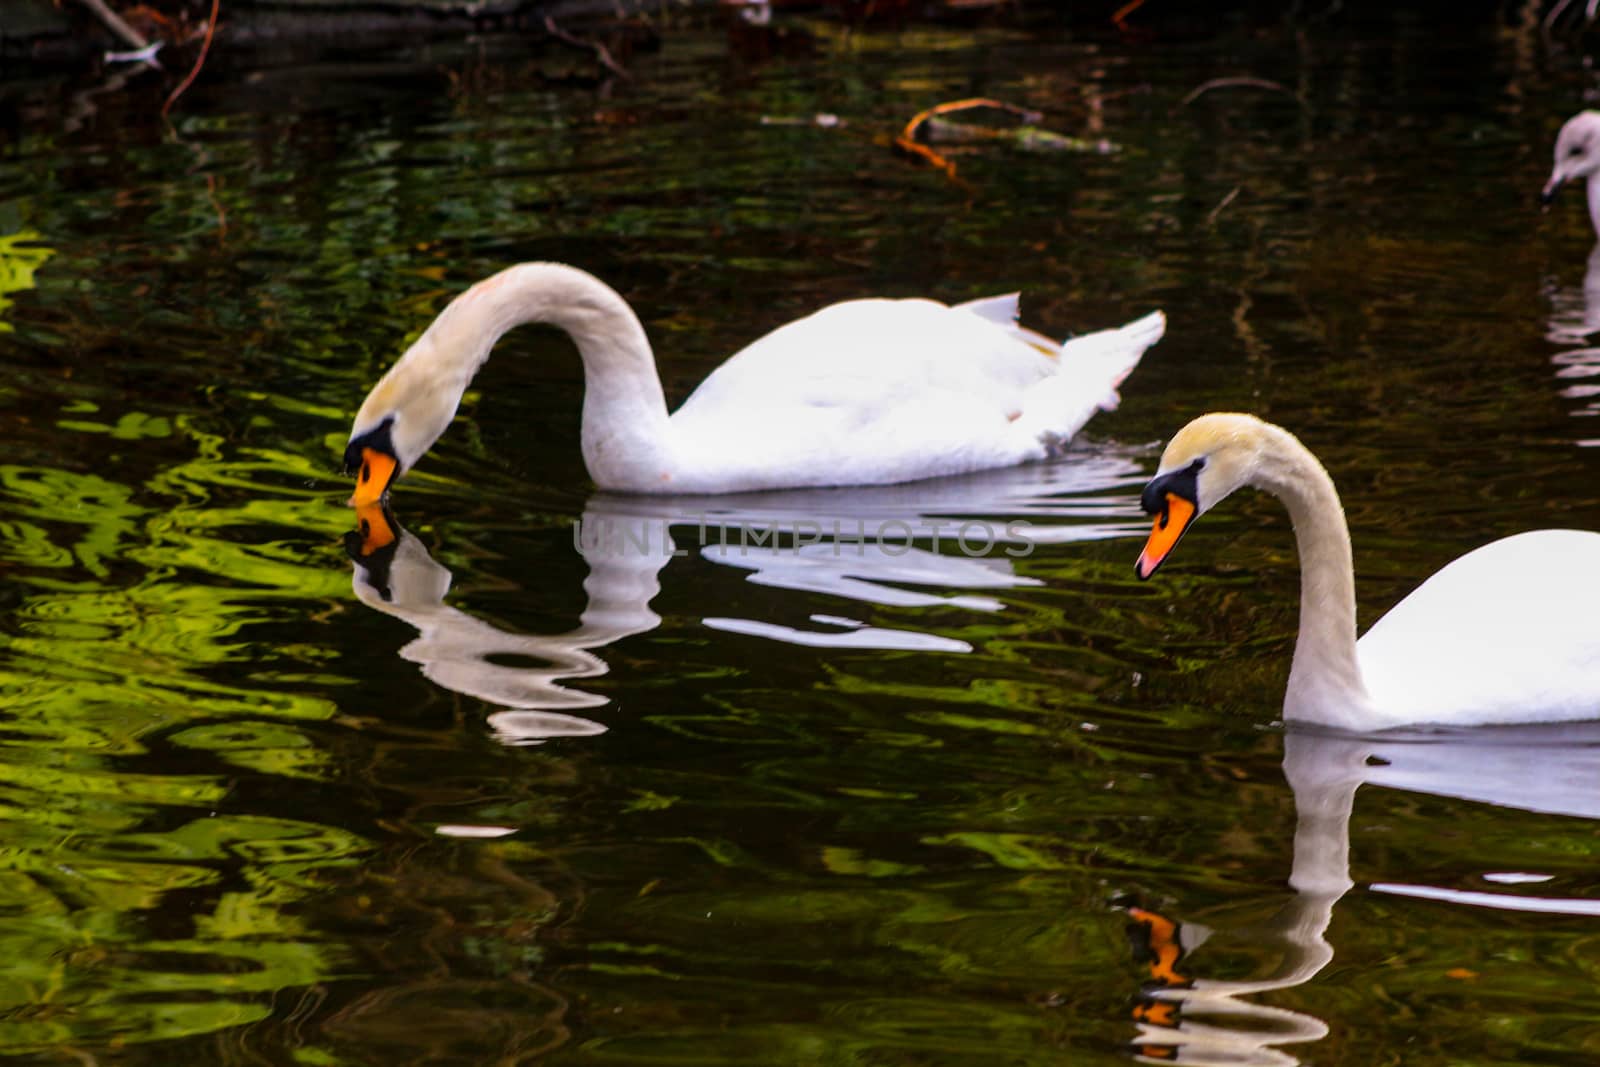 Pair of mute swans, preening their plumage on a pond